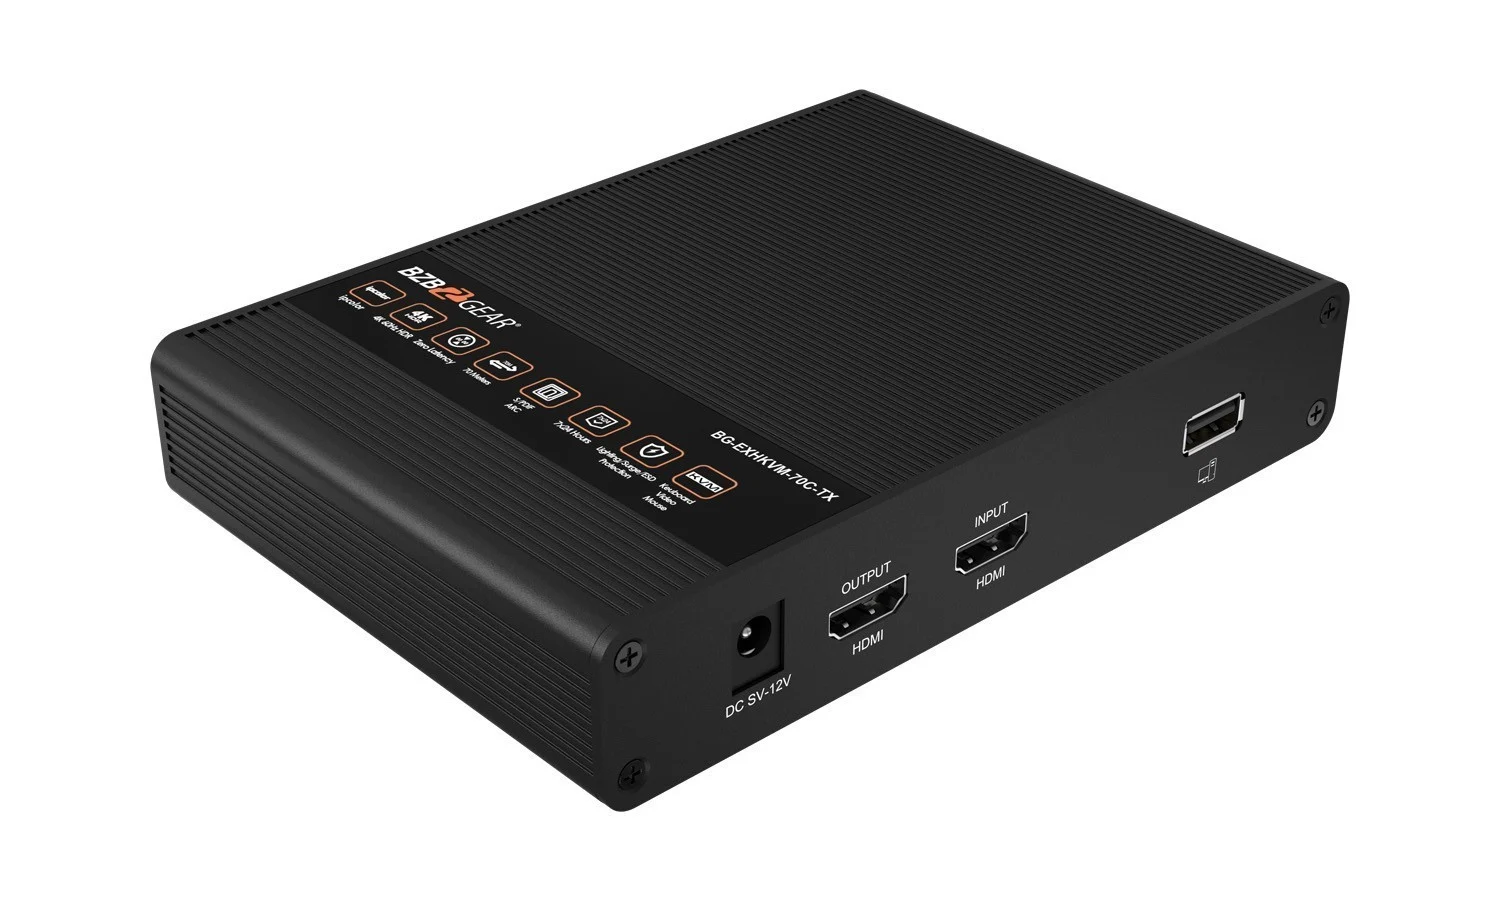 tårn Grundlægger balance BG-EXHKVM-70C 4K UHD HDMI and KVM Extender with Zero Latency up to 230ft  Support HDR and ARC